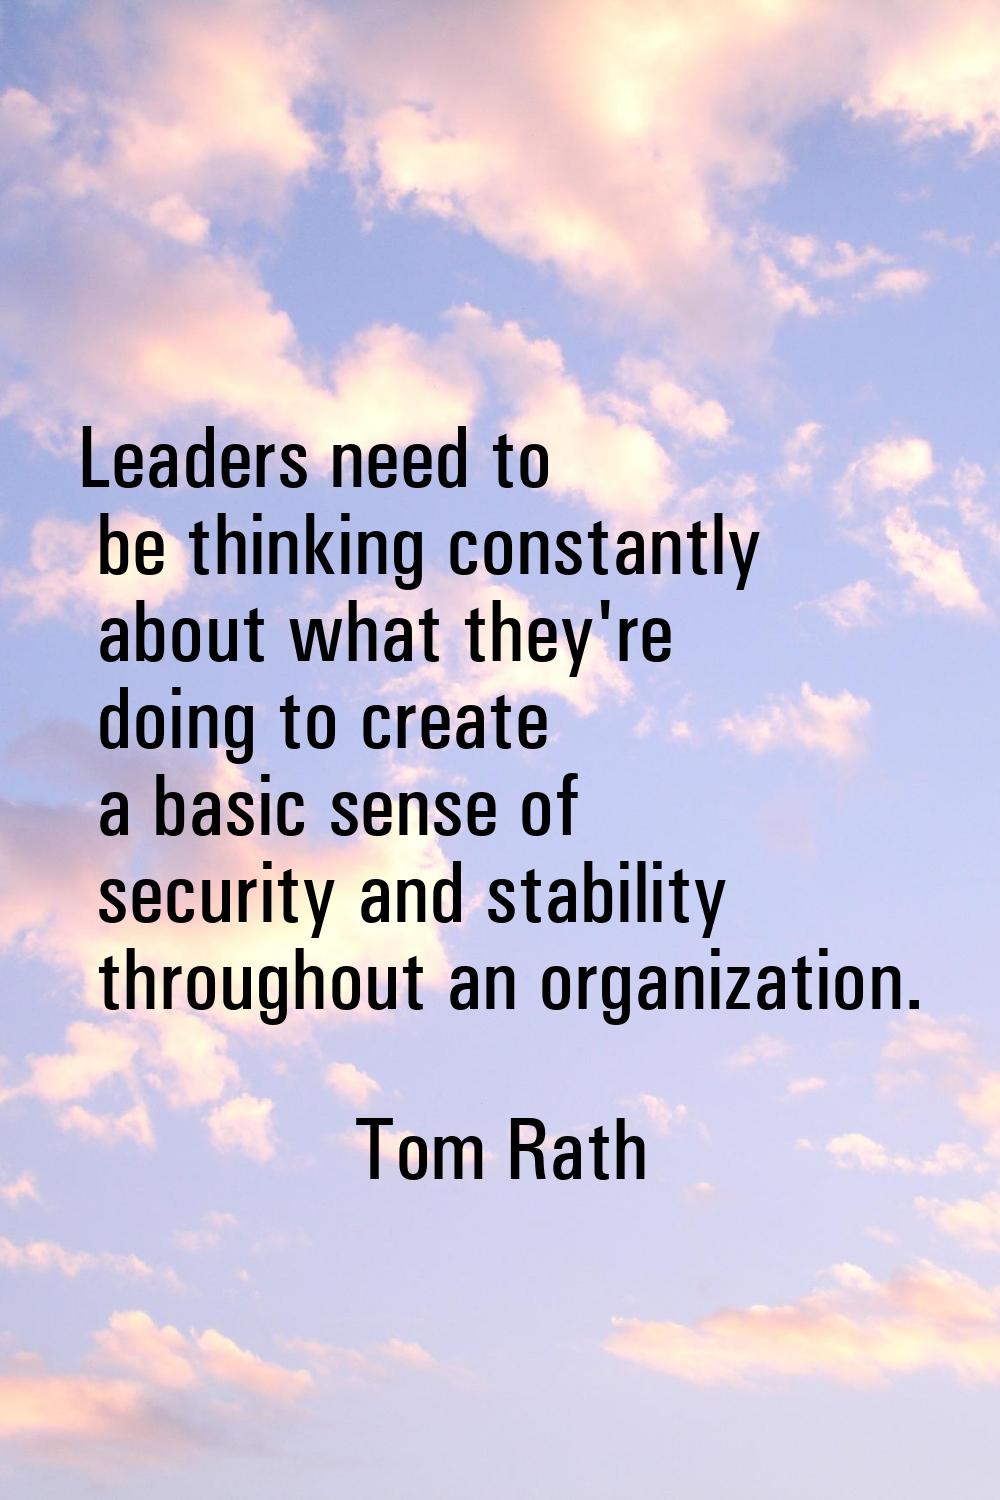 Leaders need to be thinking constantly about what they're doing to create a basic sense of security